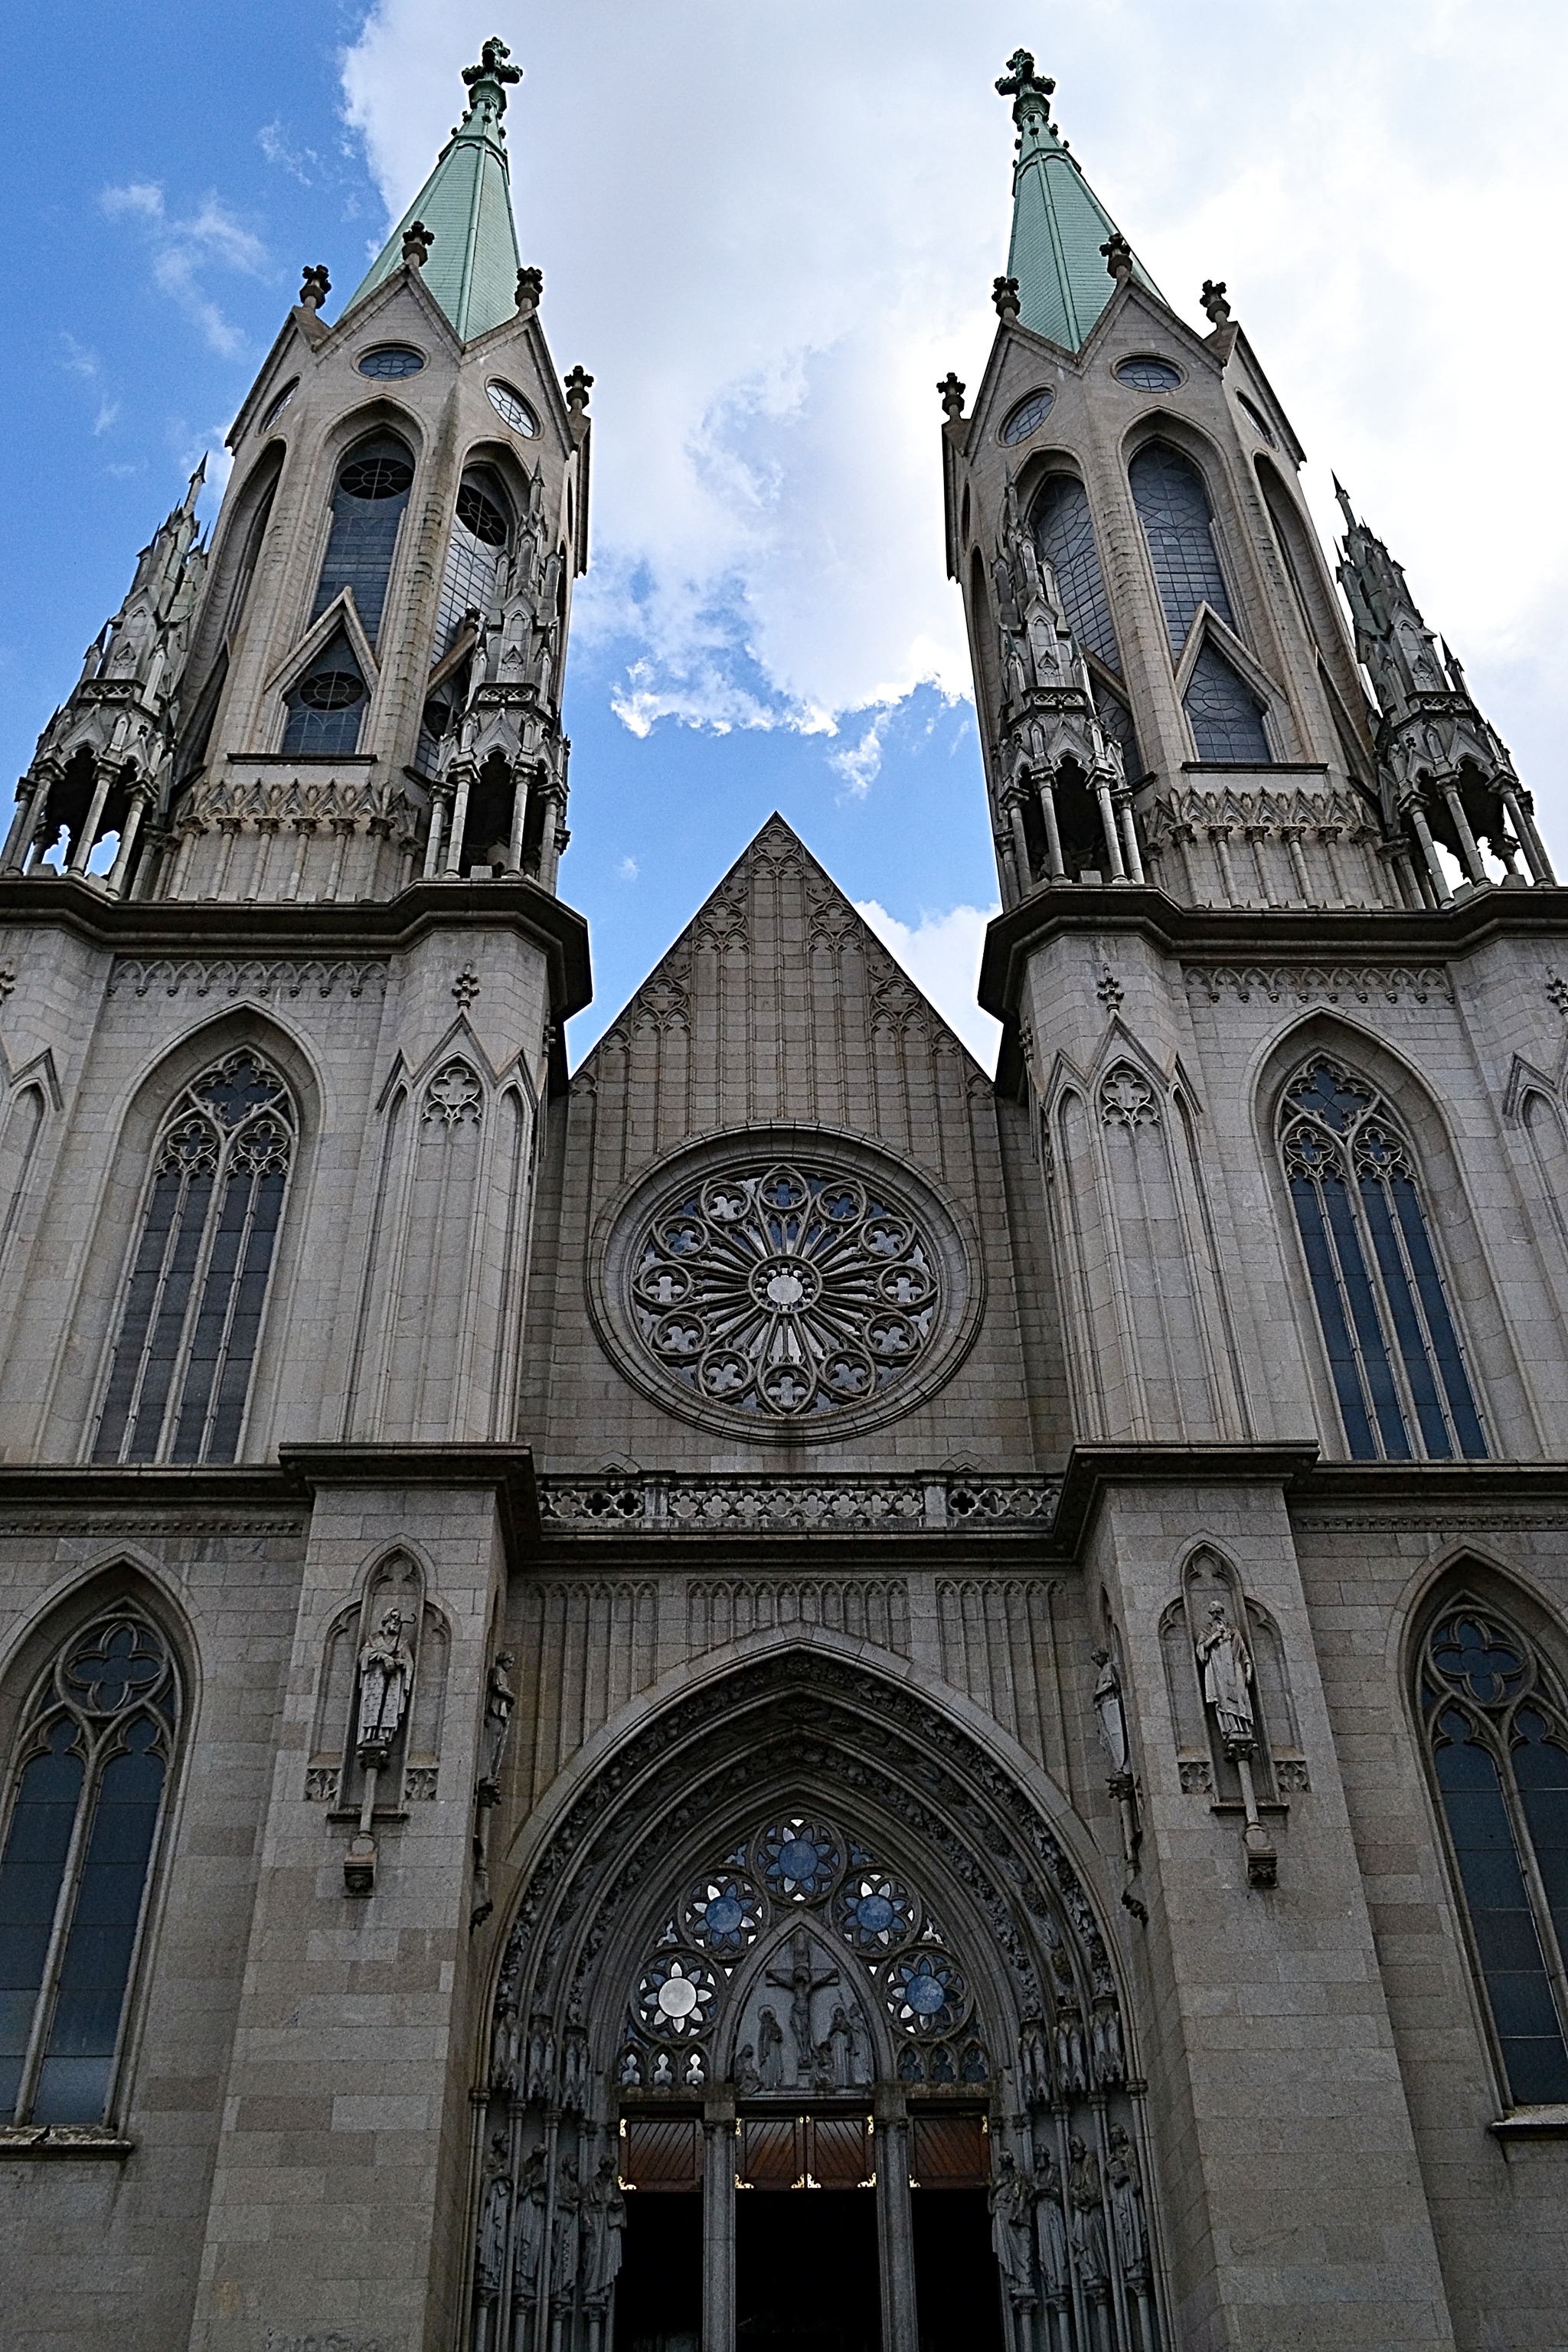 Cathedral of Sao Paulo. Brazil - My, Travels, Town, Brazil, Architecture, The photo, Sao Paulo, The cathedral, Religion, South America, Temple, sights, Longpost